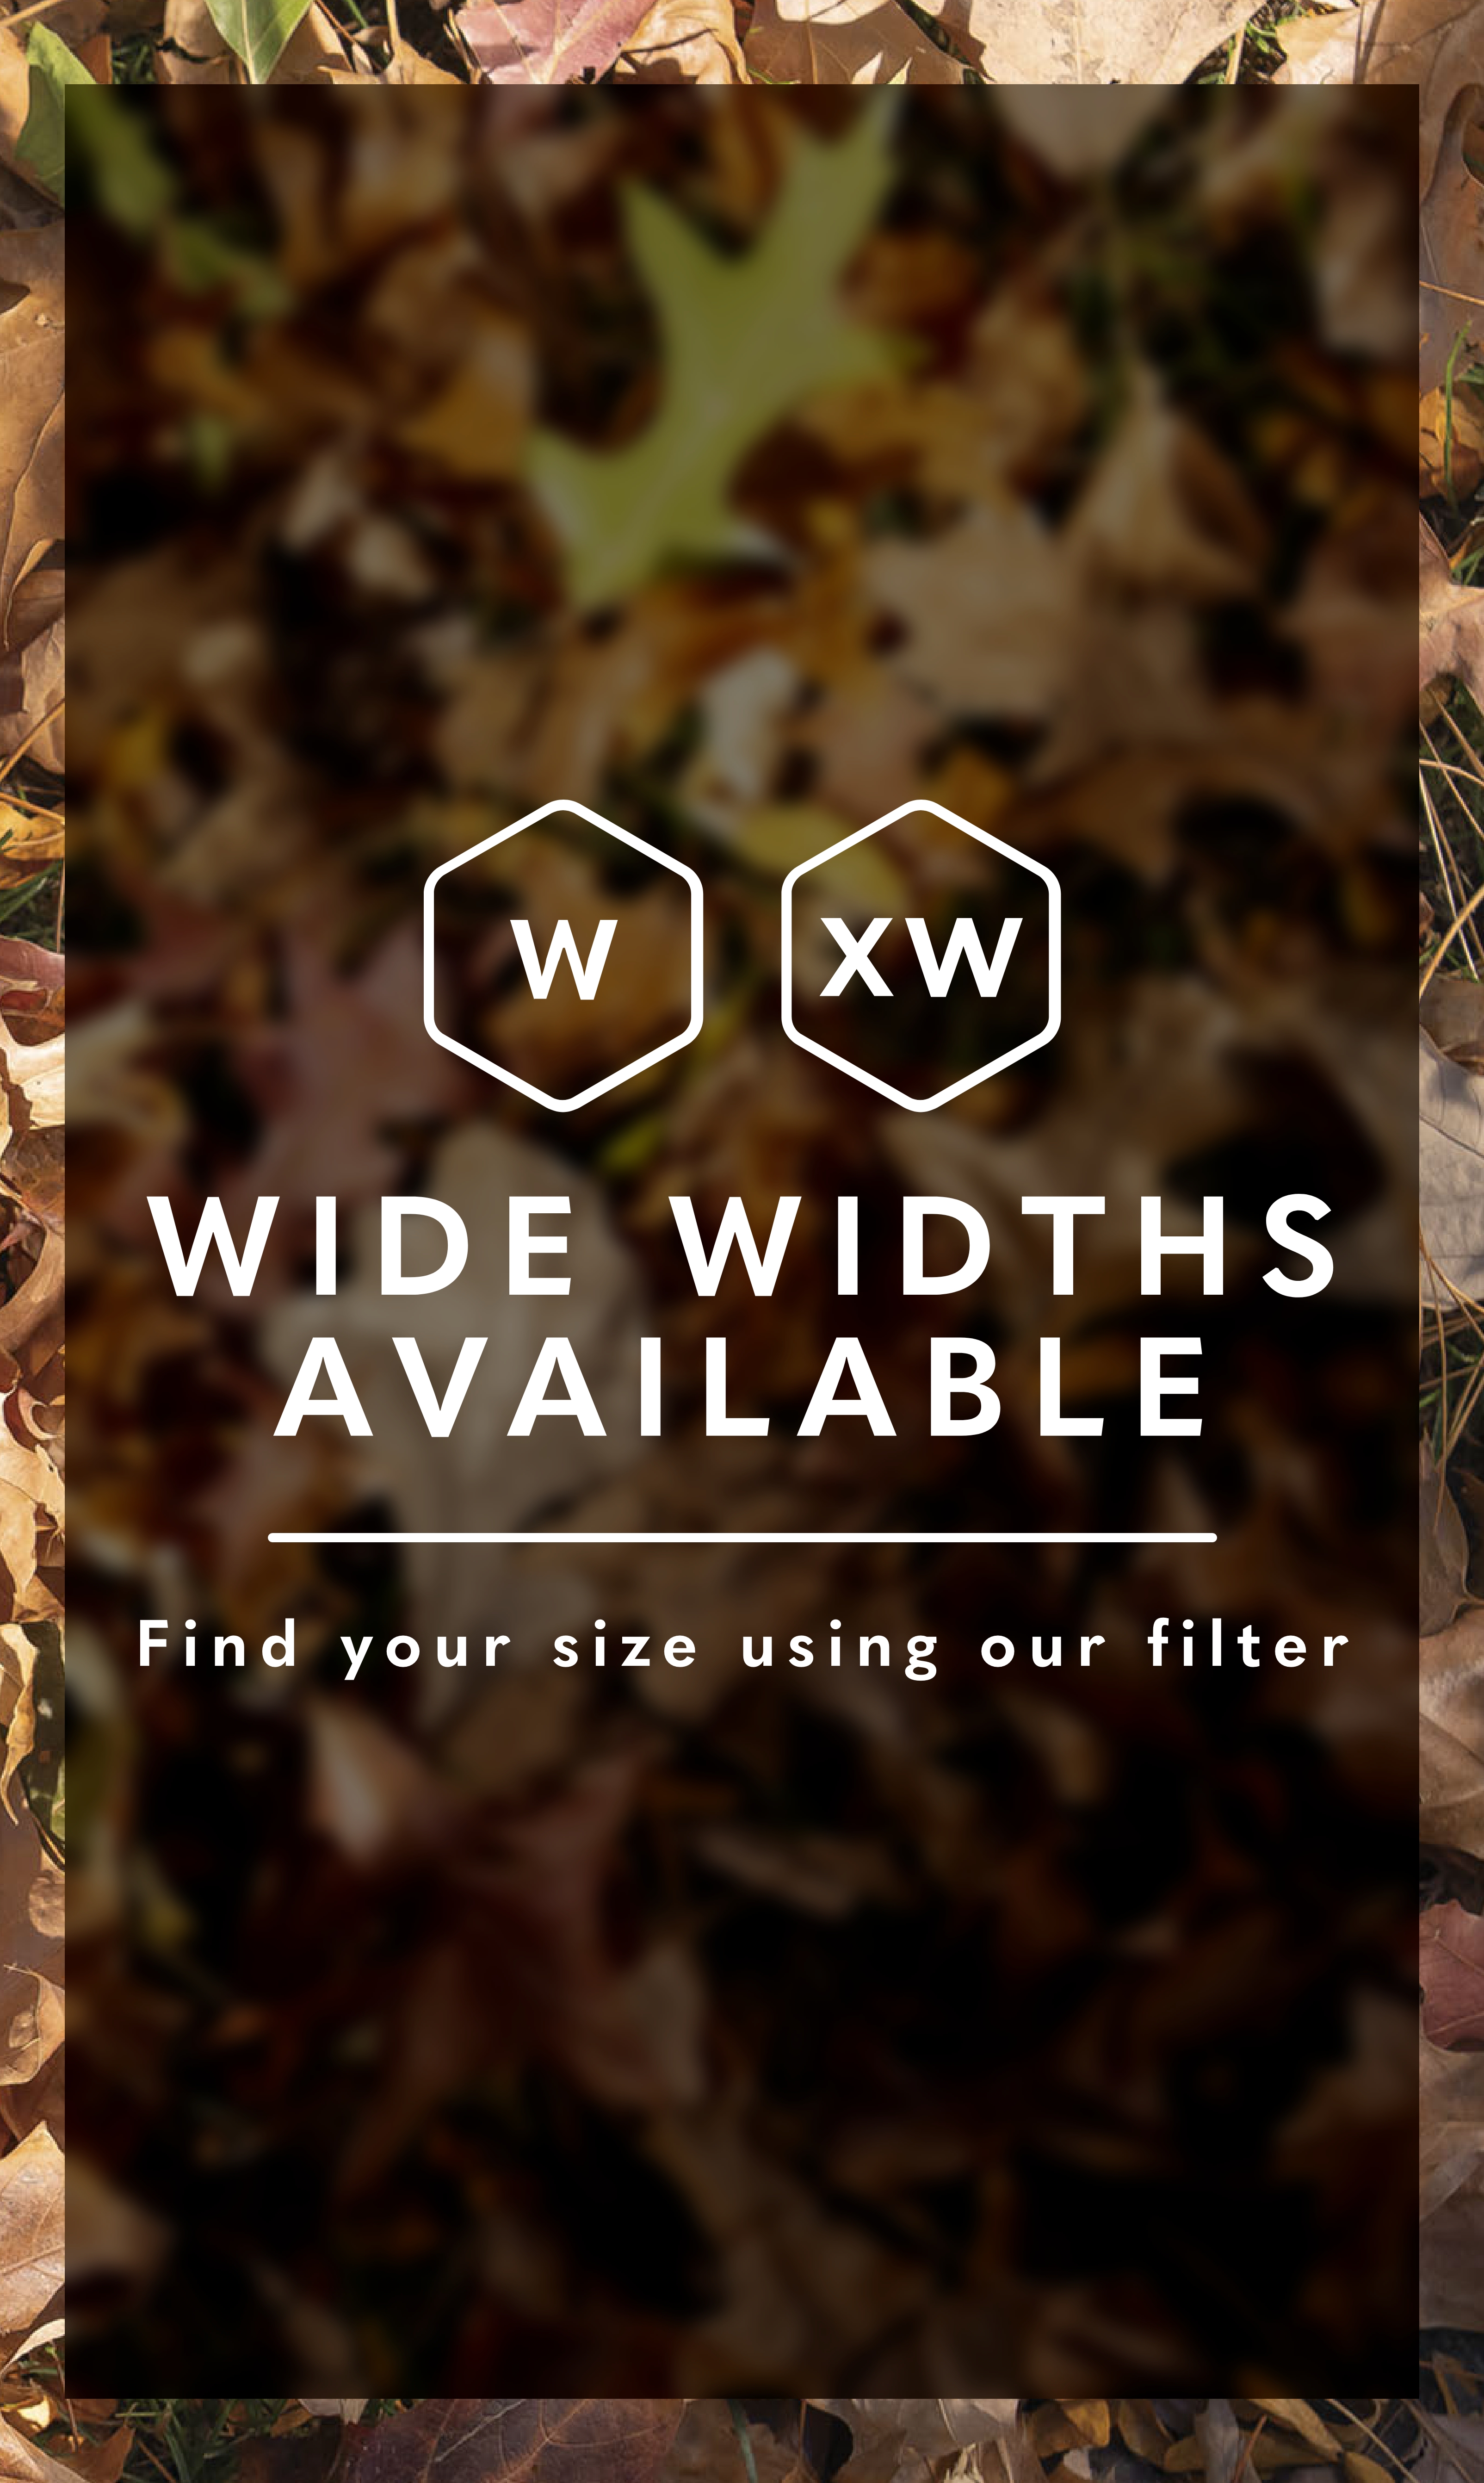 Extended Widths category. Wide widths are available! Find your size using our filter.